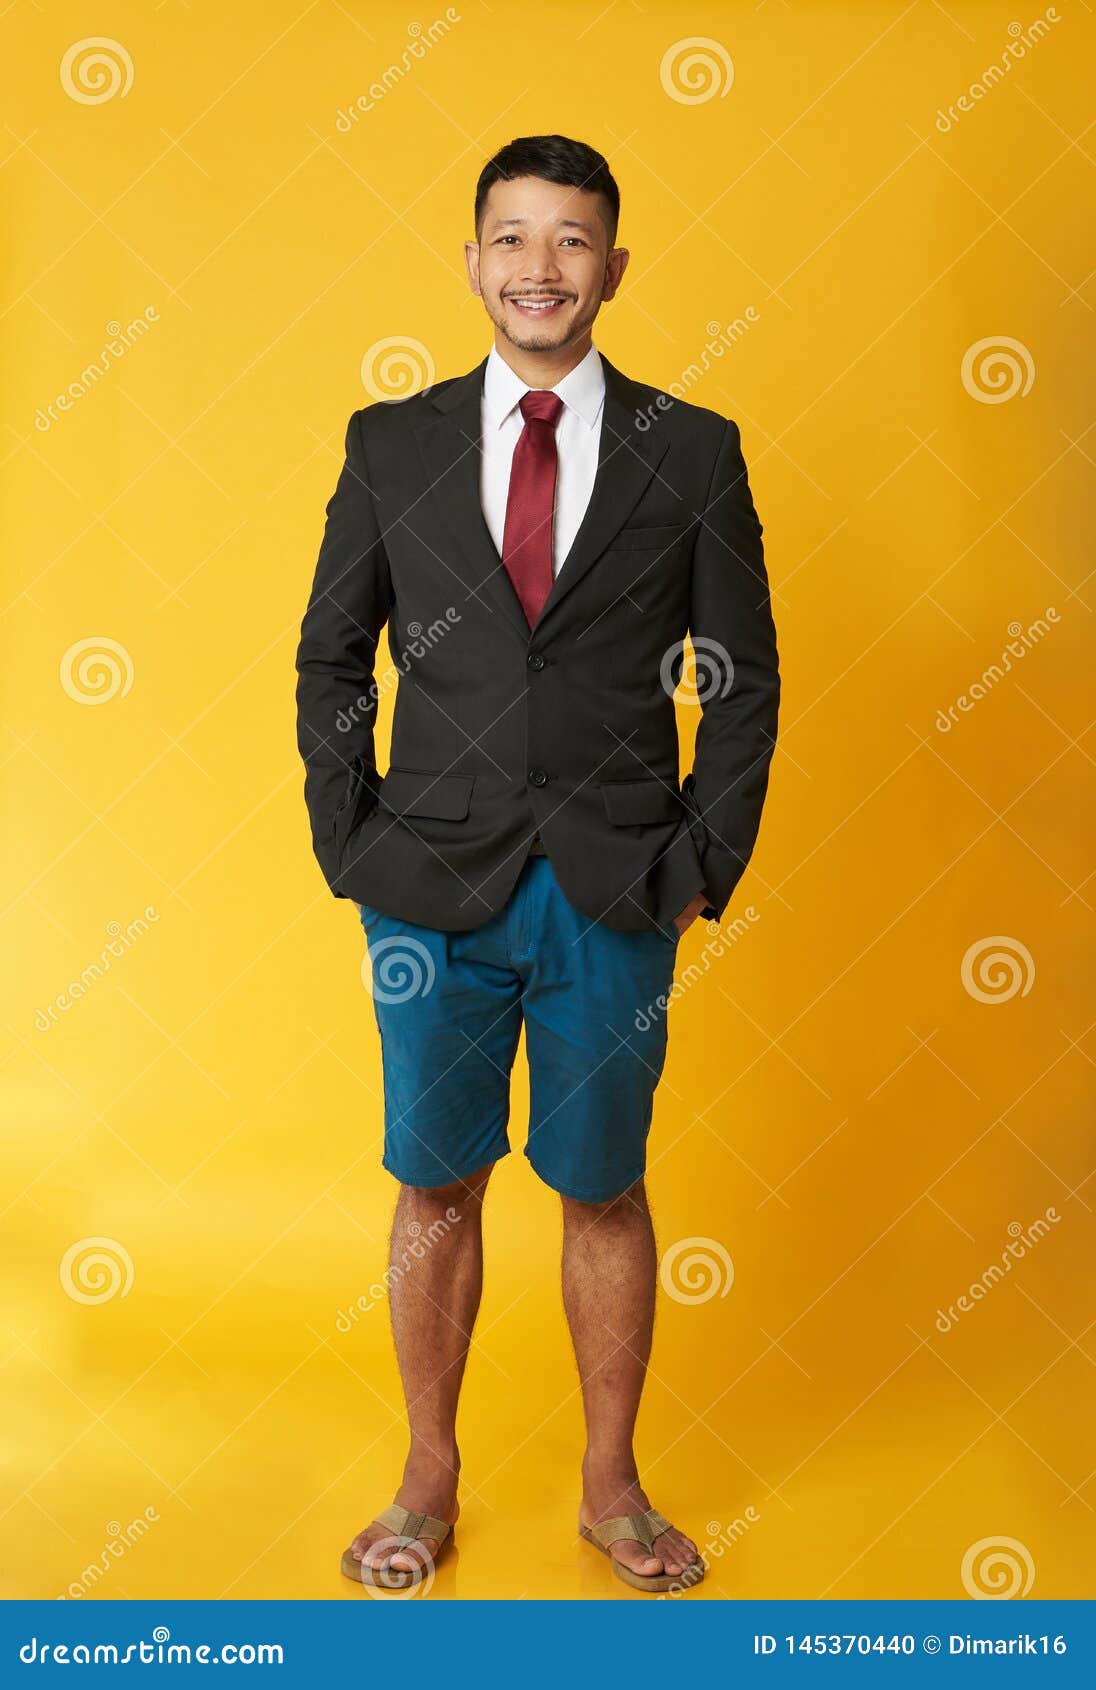 guy with coat and beach shorts